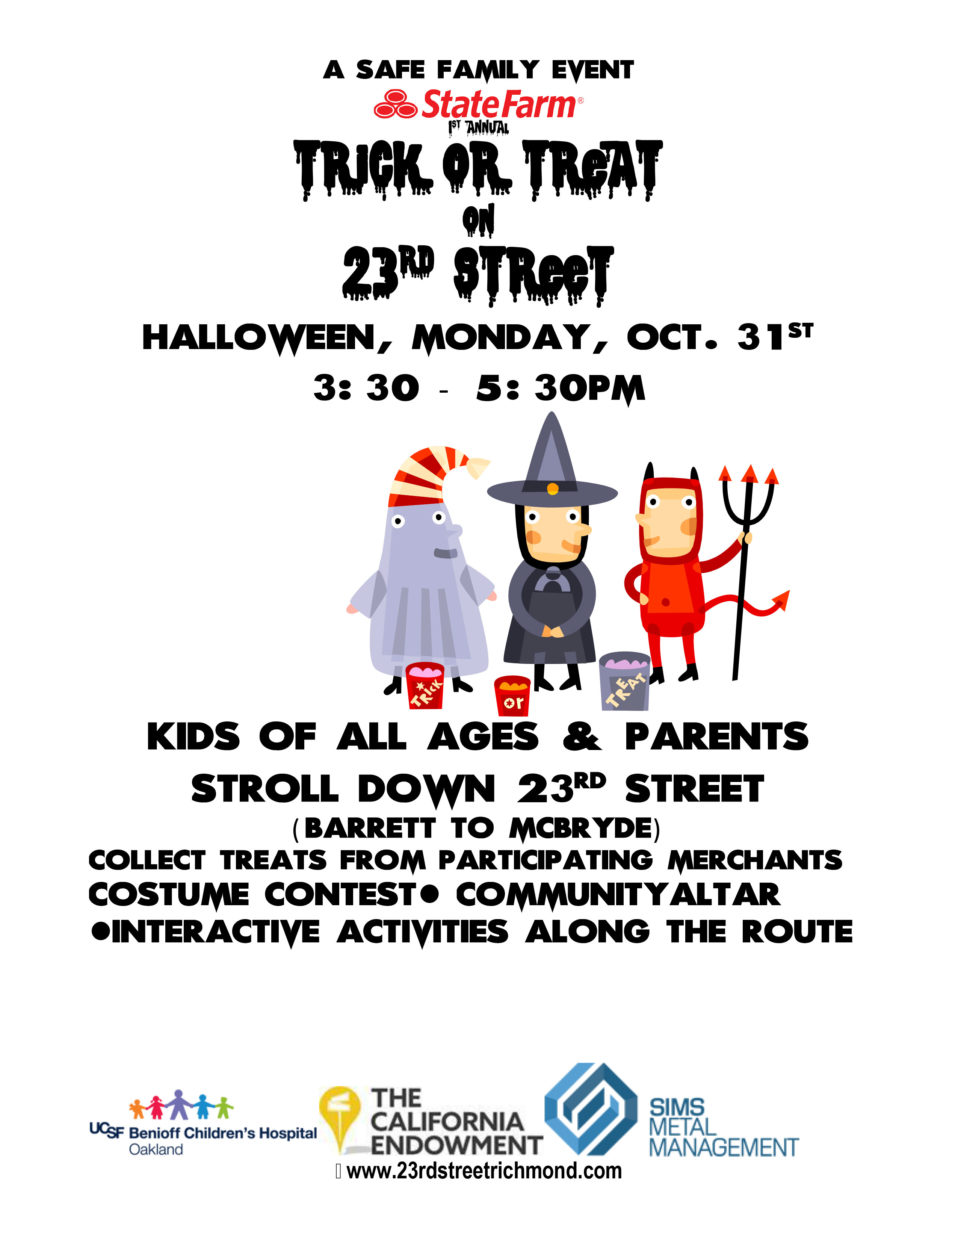 Trick OR Treat on 23RD Street Richmond Chamber of Commerce